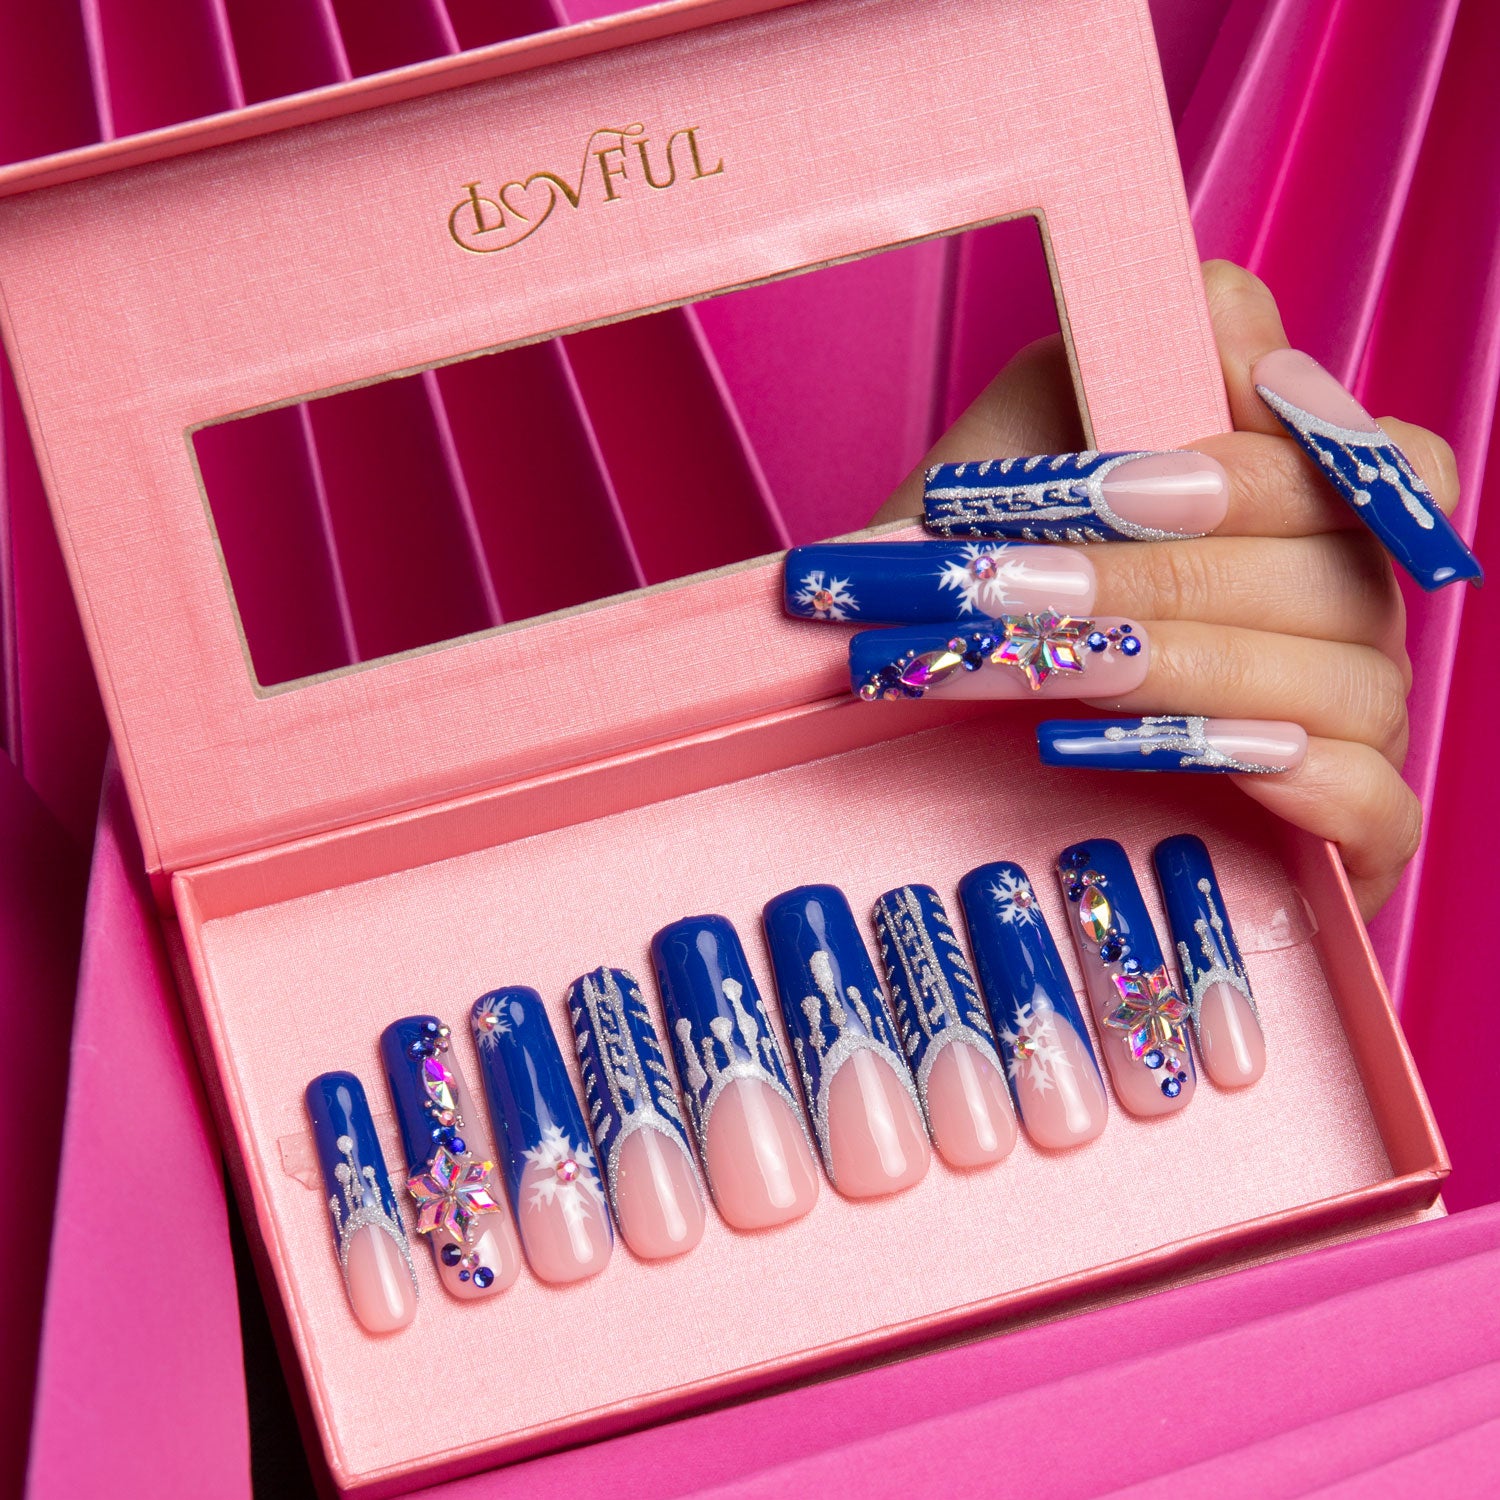 Set of blue French tip press-on nails with white snowflake designs in a pink Lovful box, with a hand model showcasing the nails against a pink background